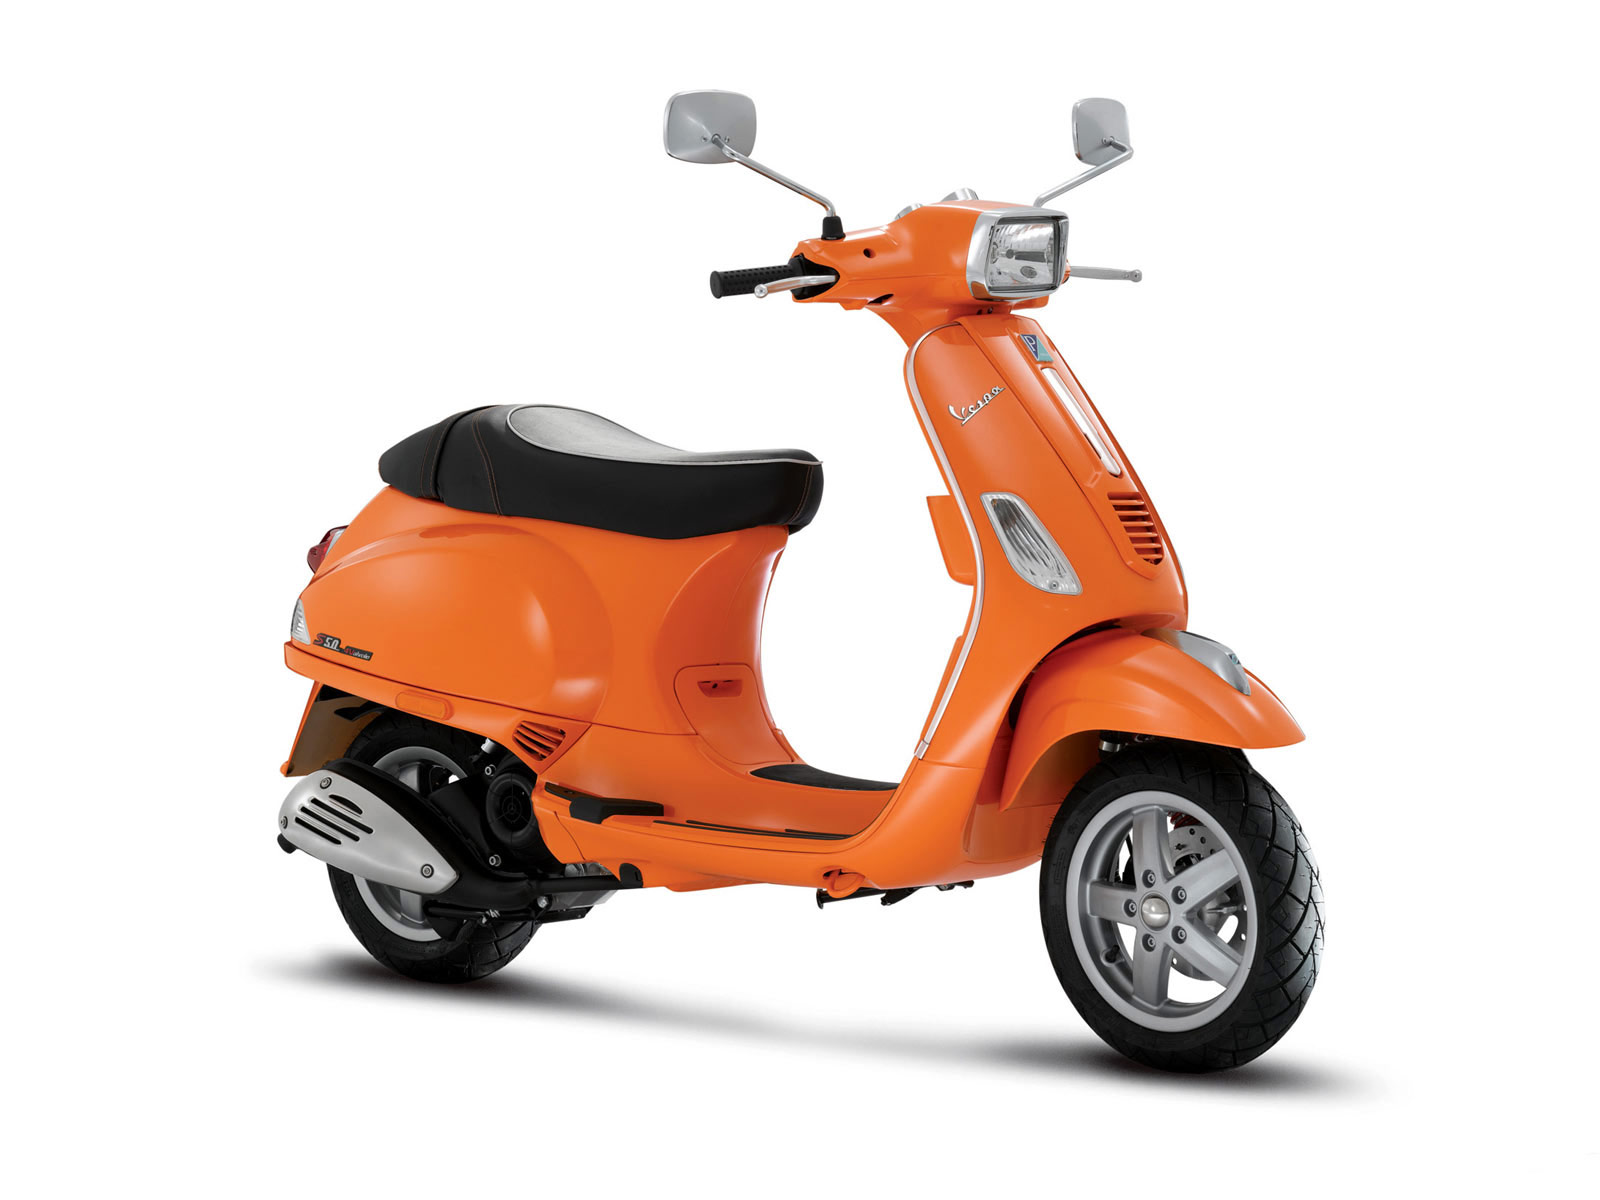 Vespa s50 4v 2011 - Motorcycle Pictures